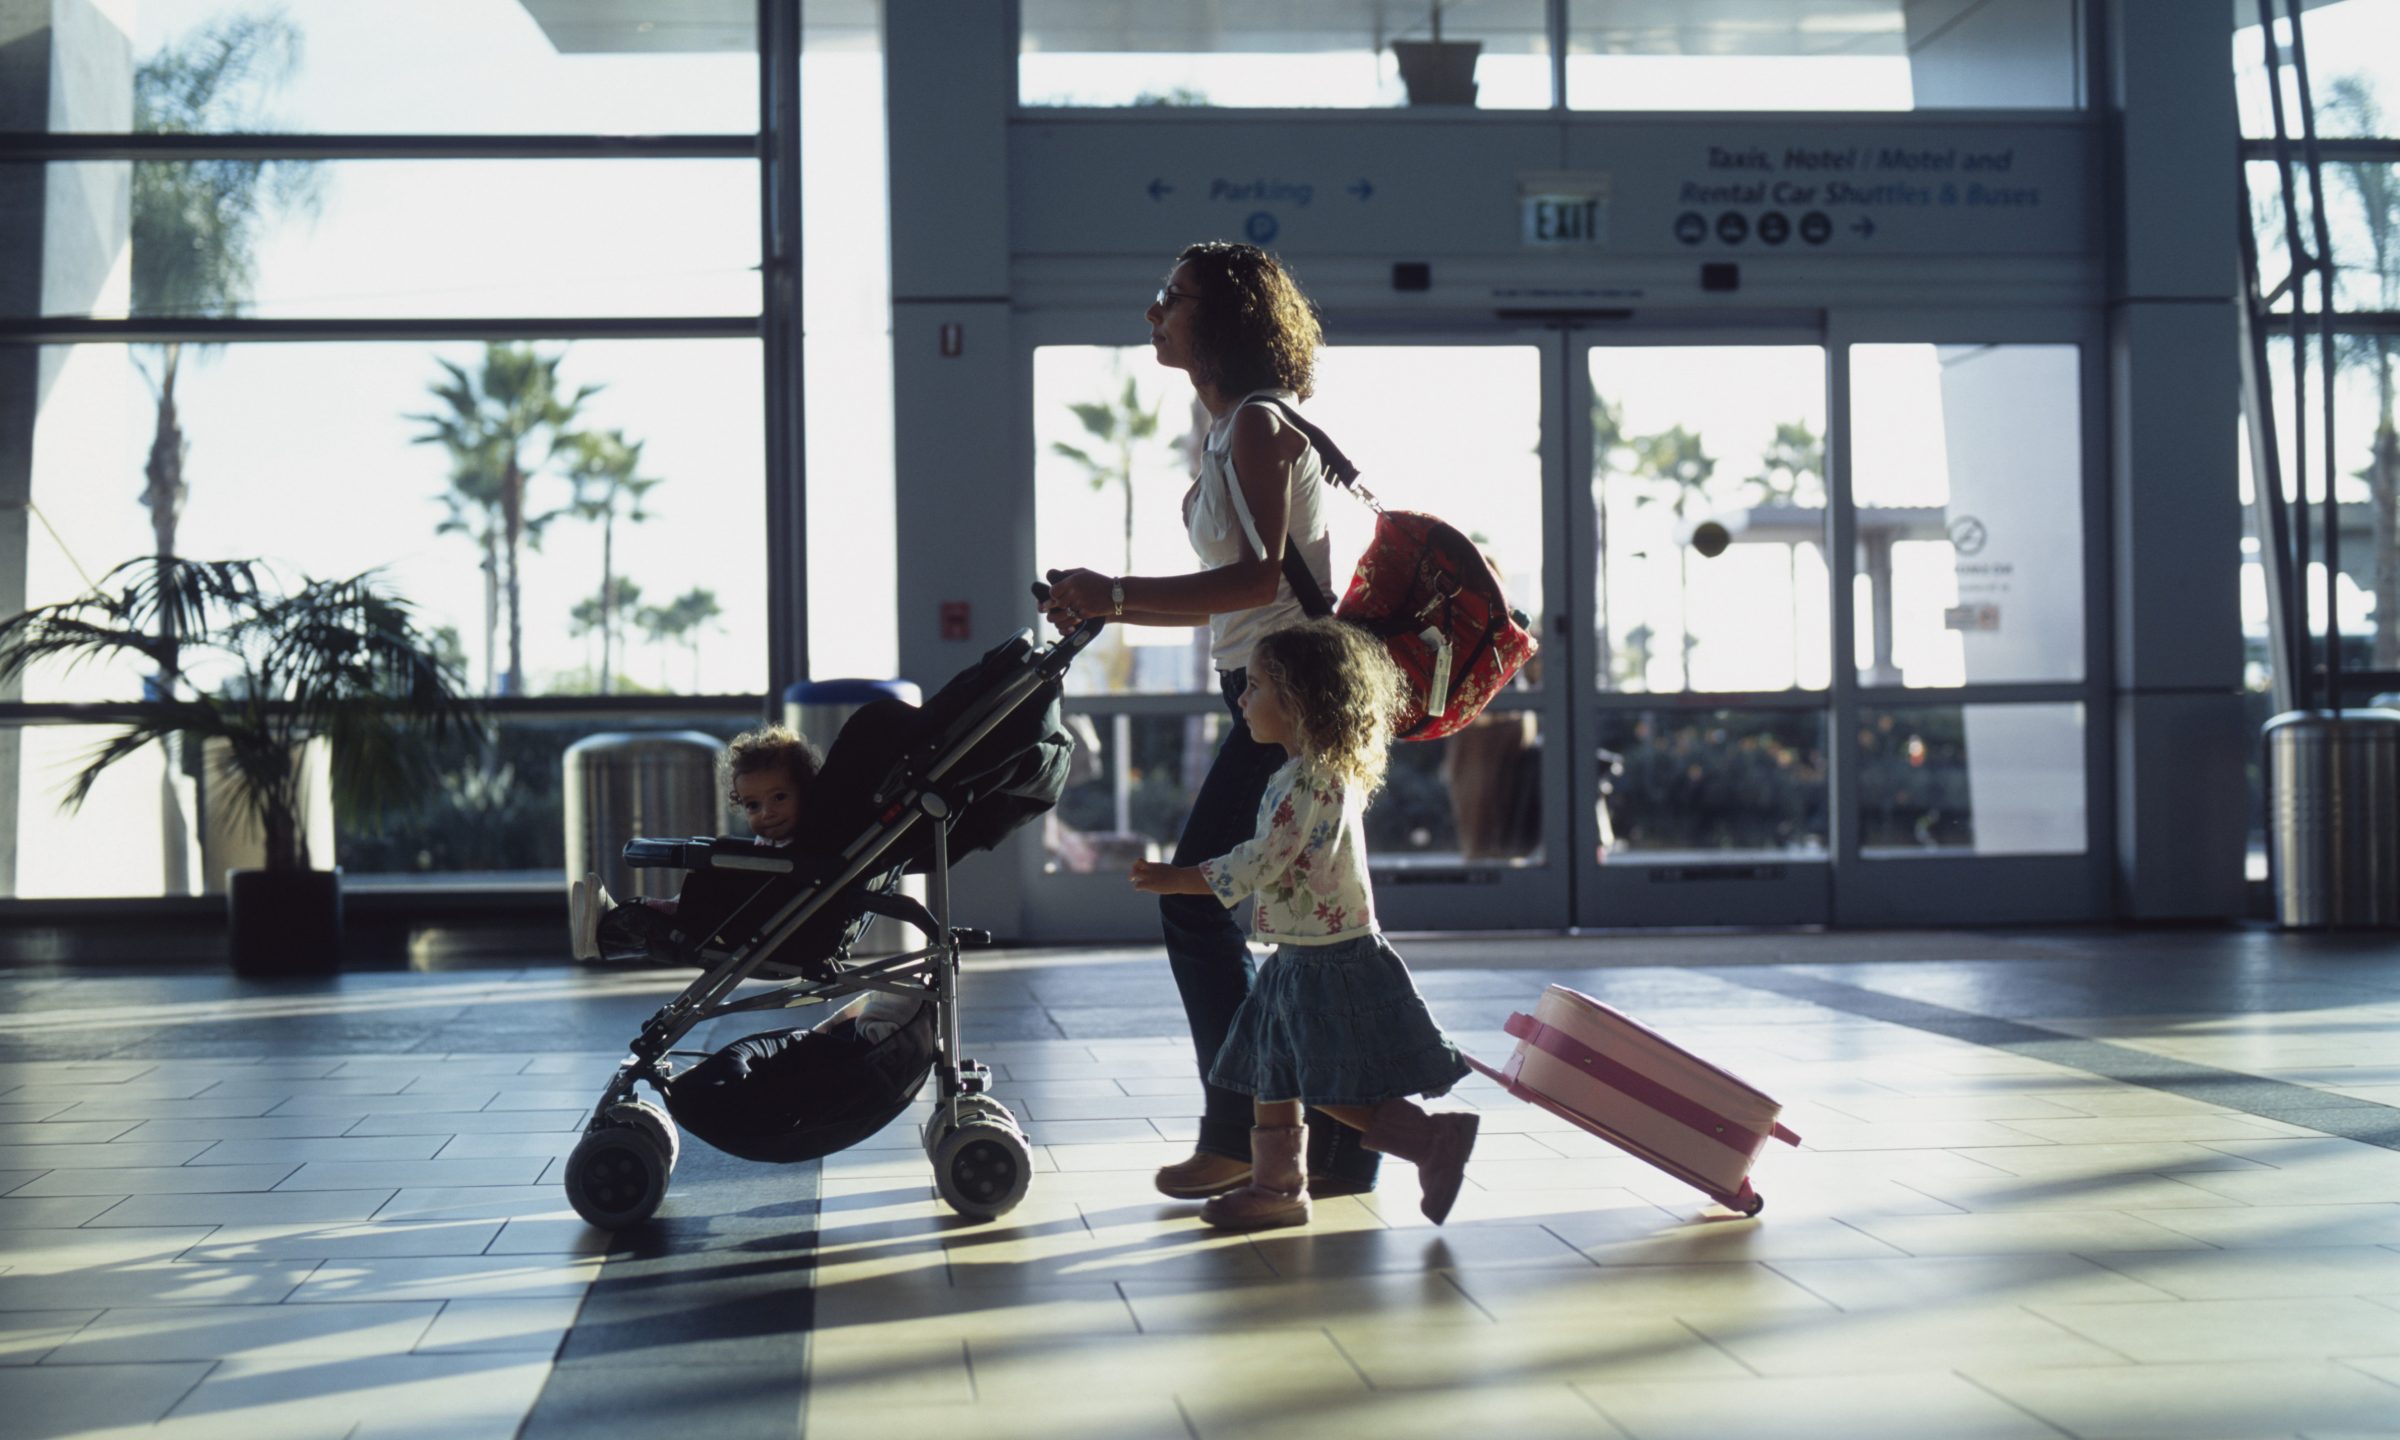 How to Navigate the Airport - NerdWallet